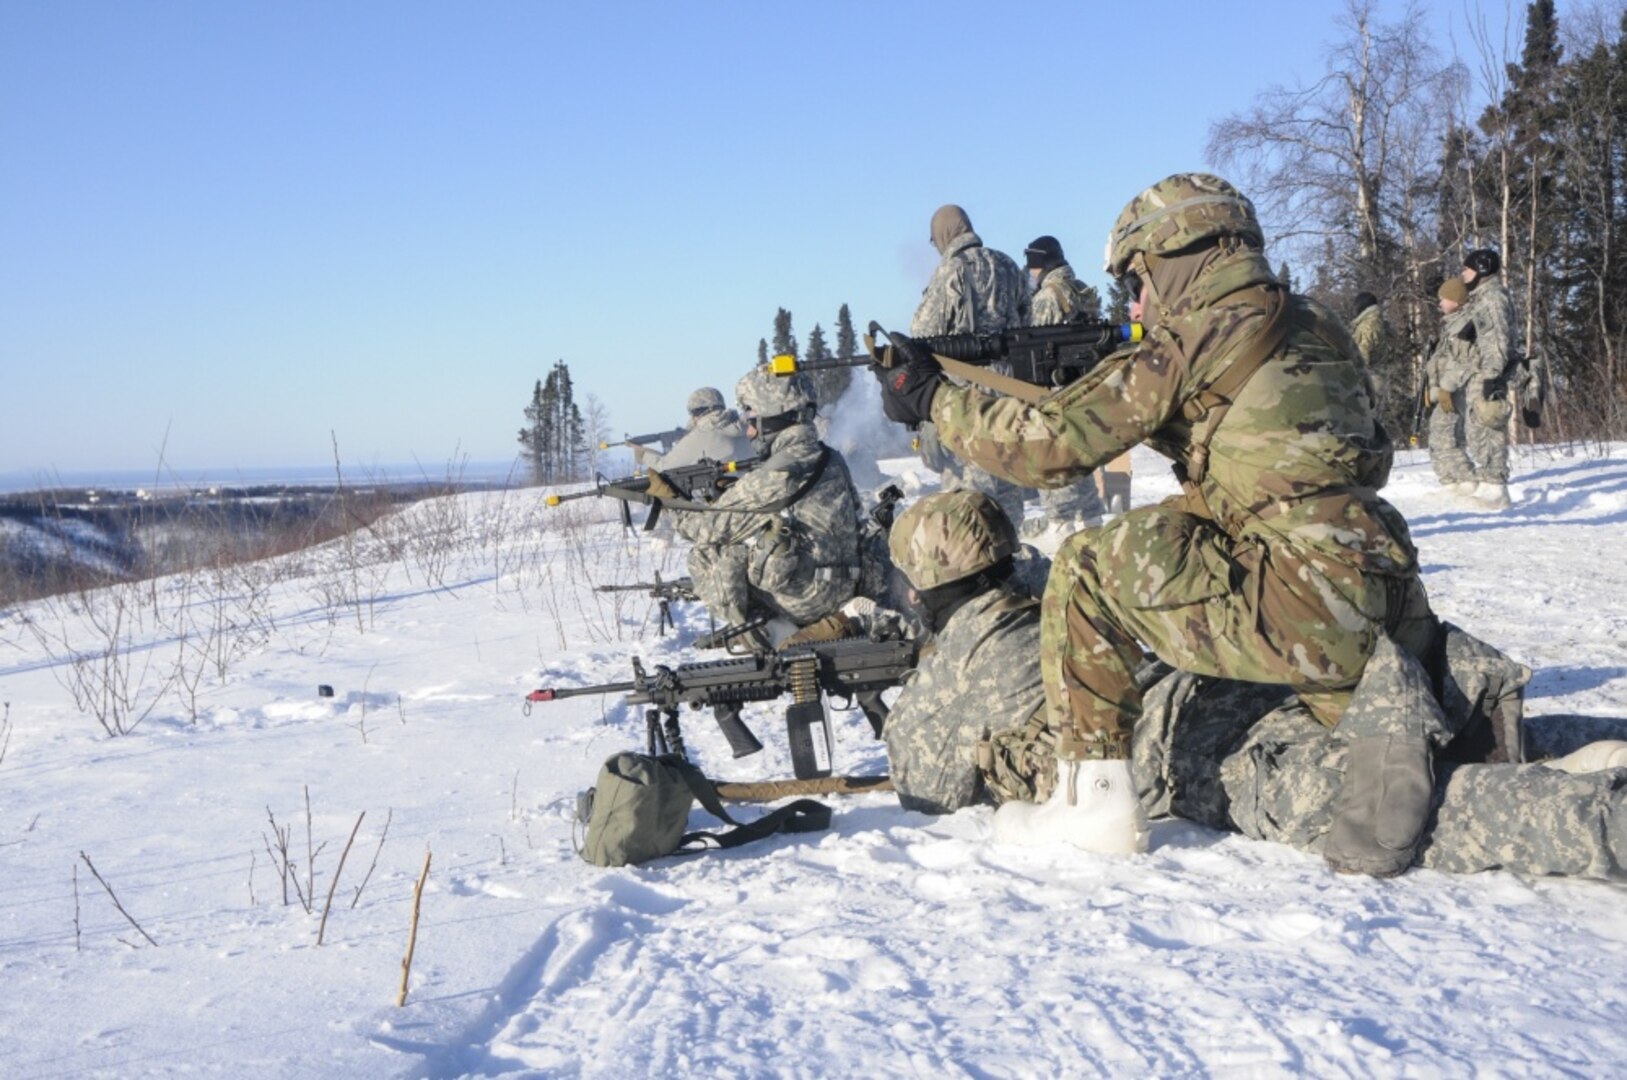 Alaska Guardsmen Gain Lethality with Arctic Survival, New M17 Pistol Training in the Arctic